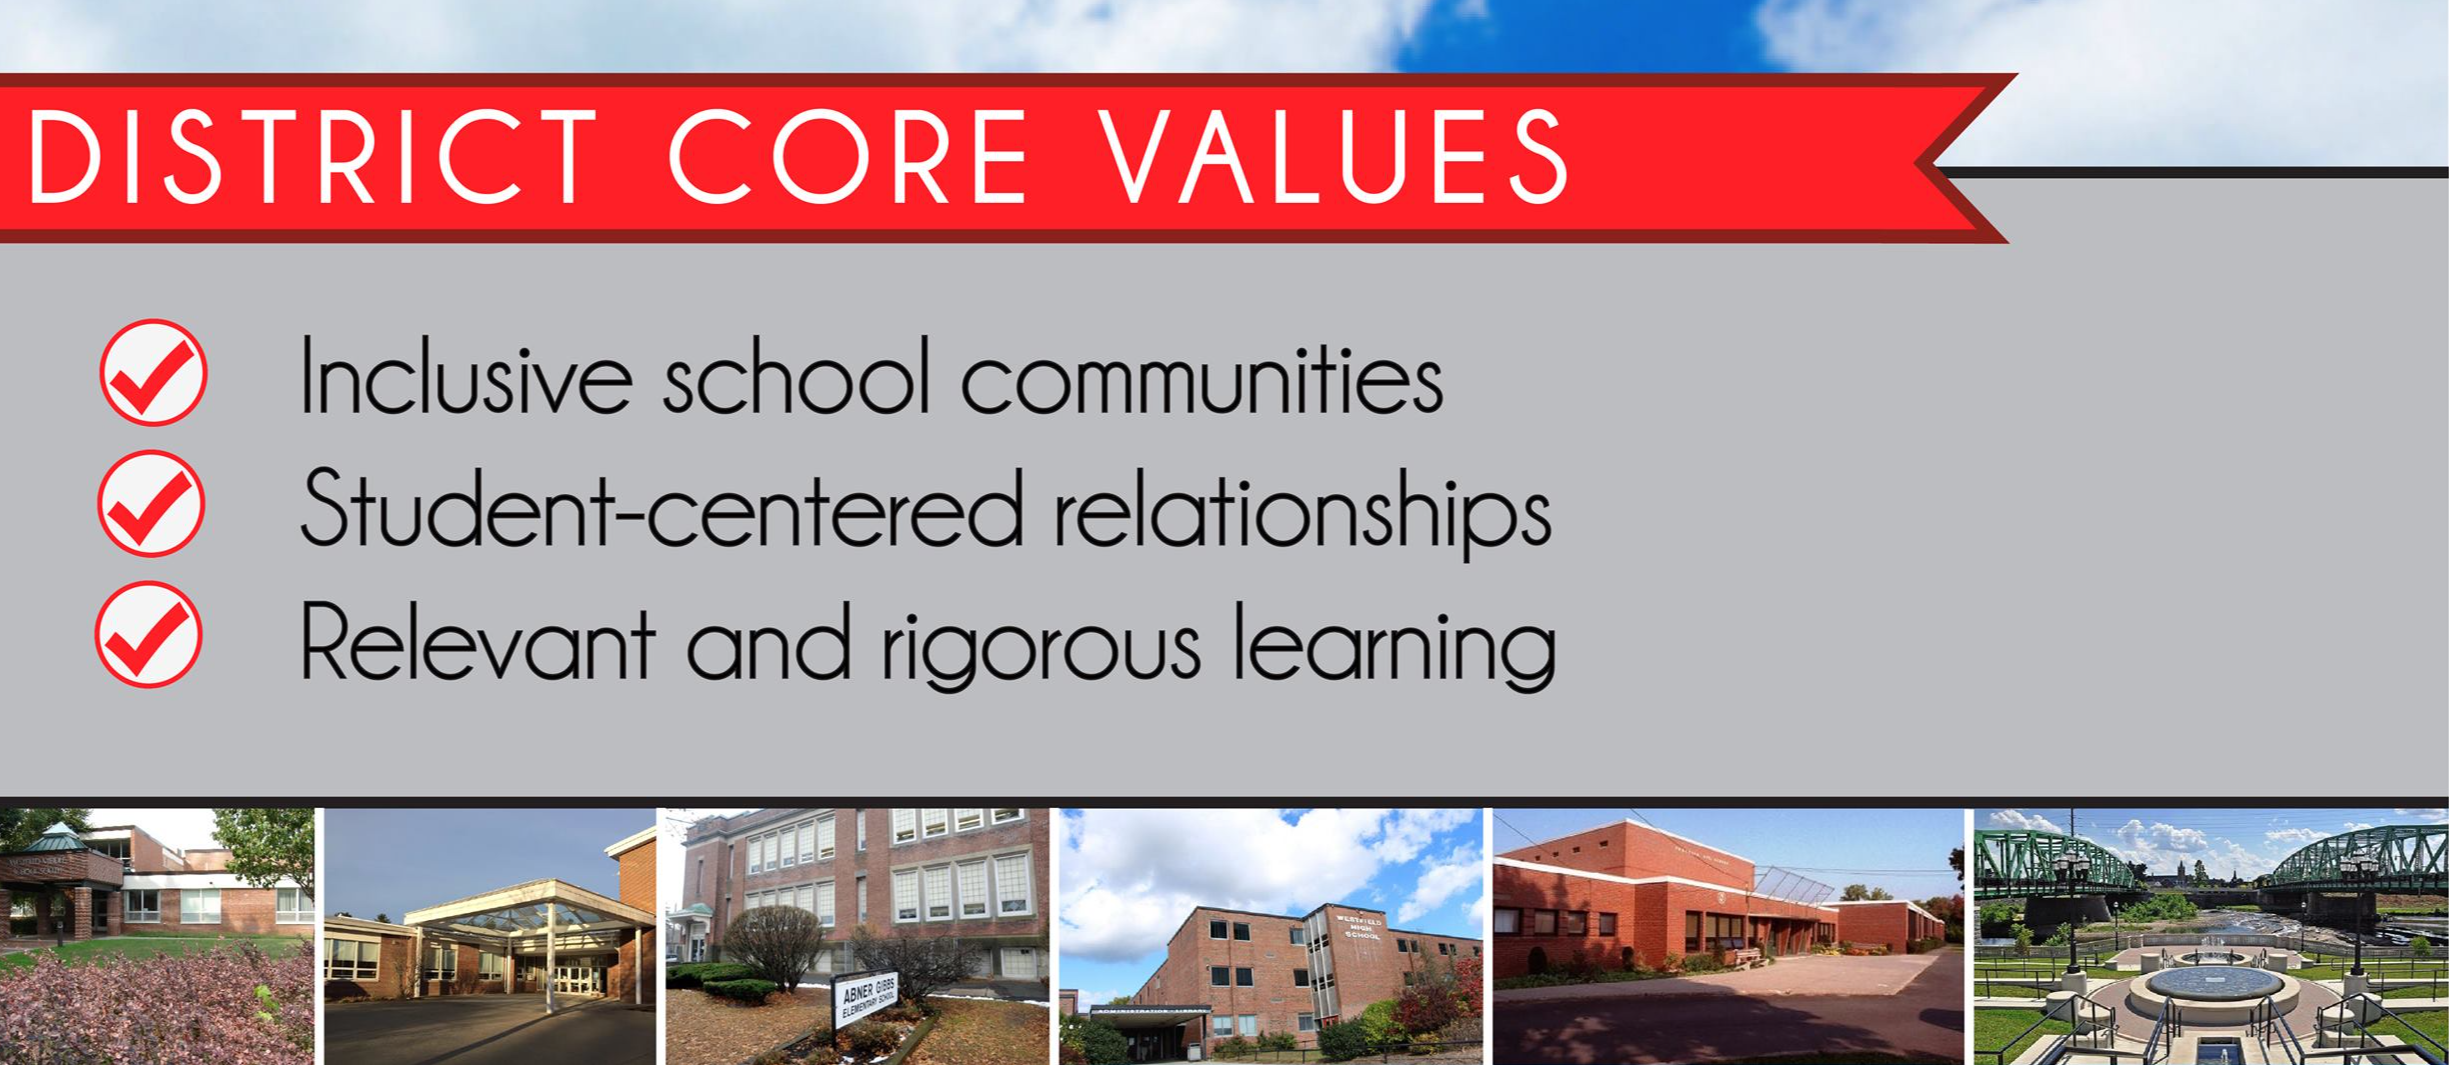 Westfield's district core values: inclusive school communities, student-centered relationships, relevant and rigorous learning